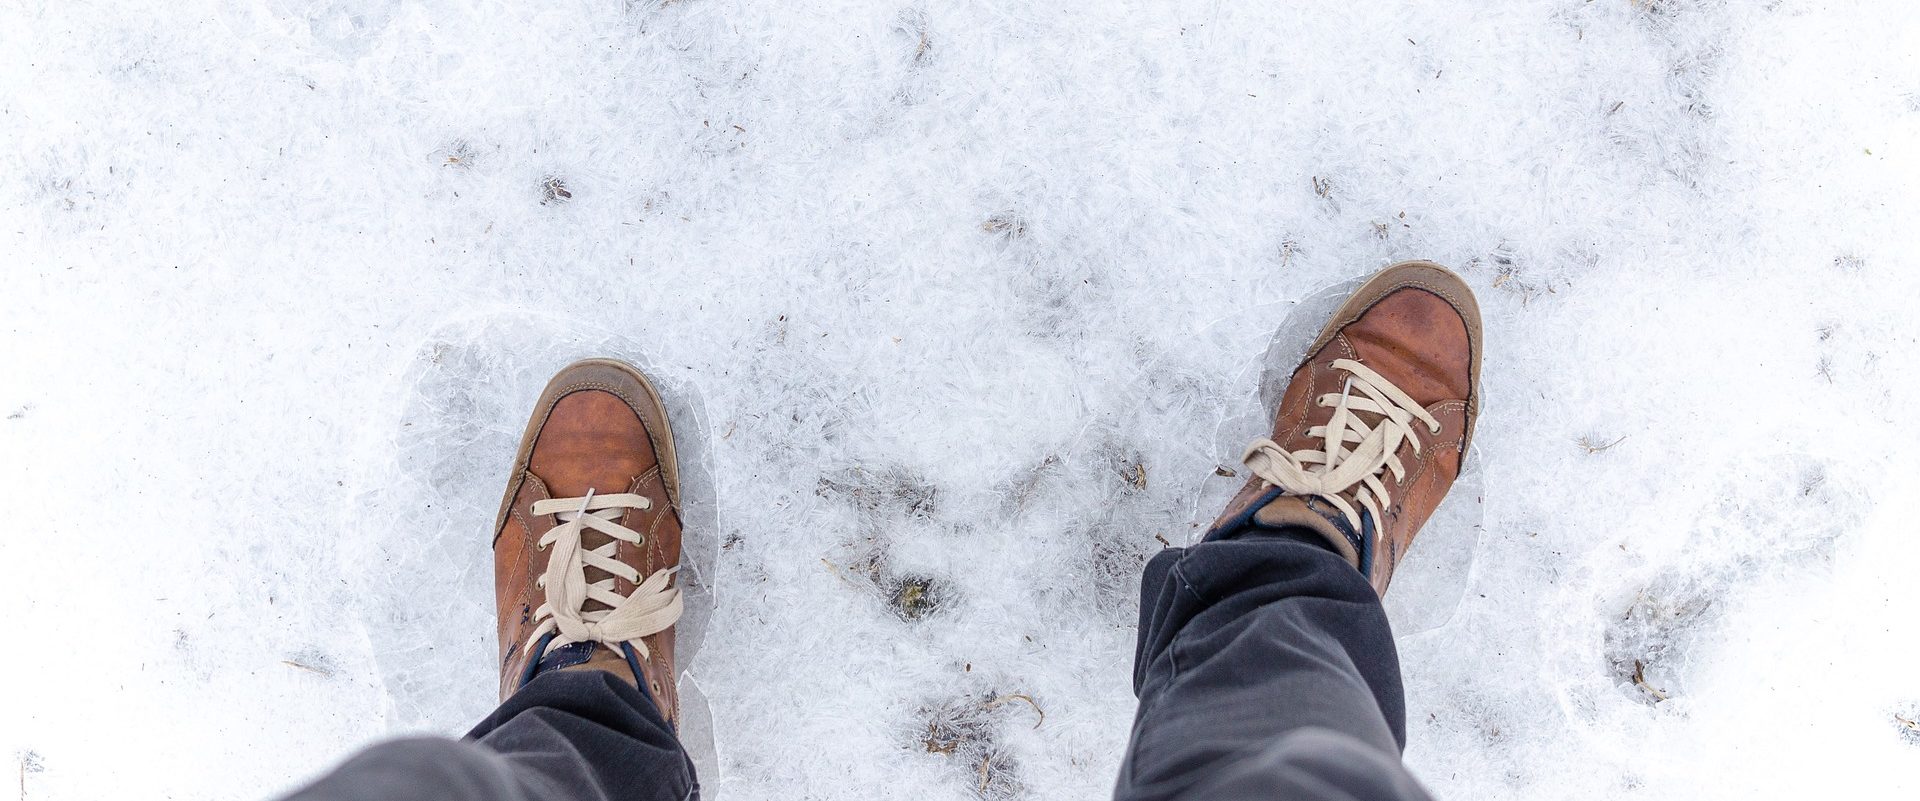 Fall prevention during winter months.